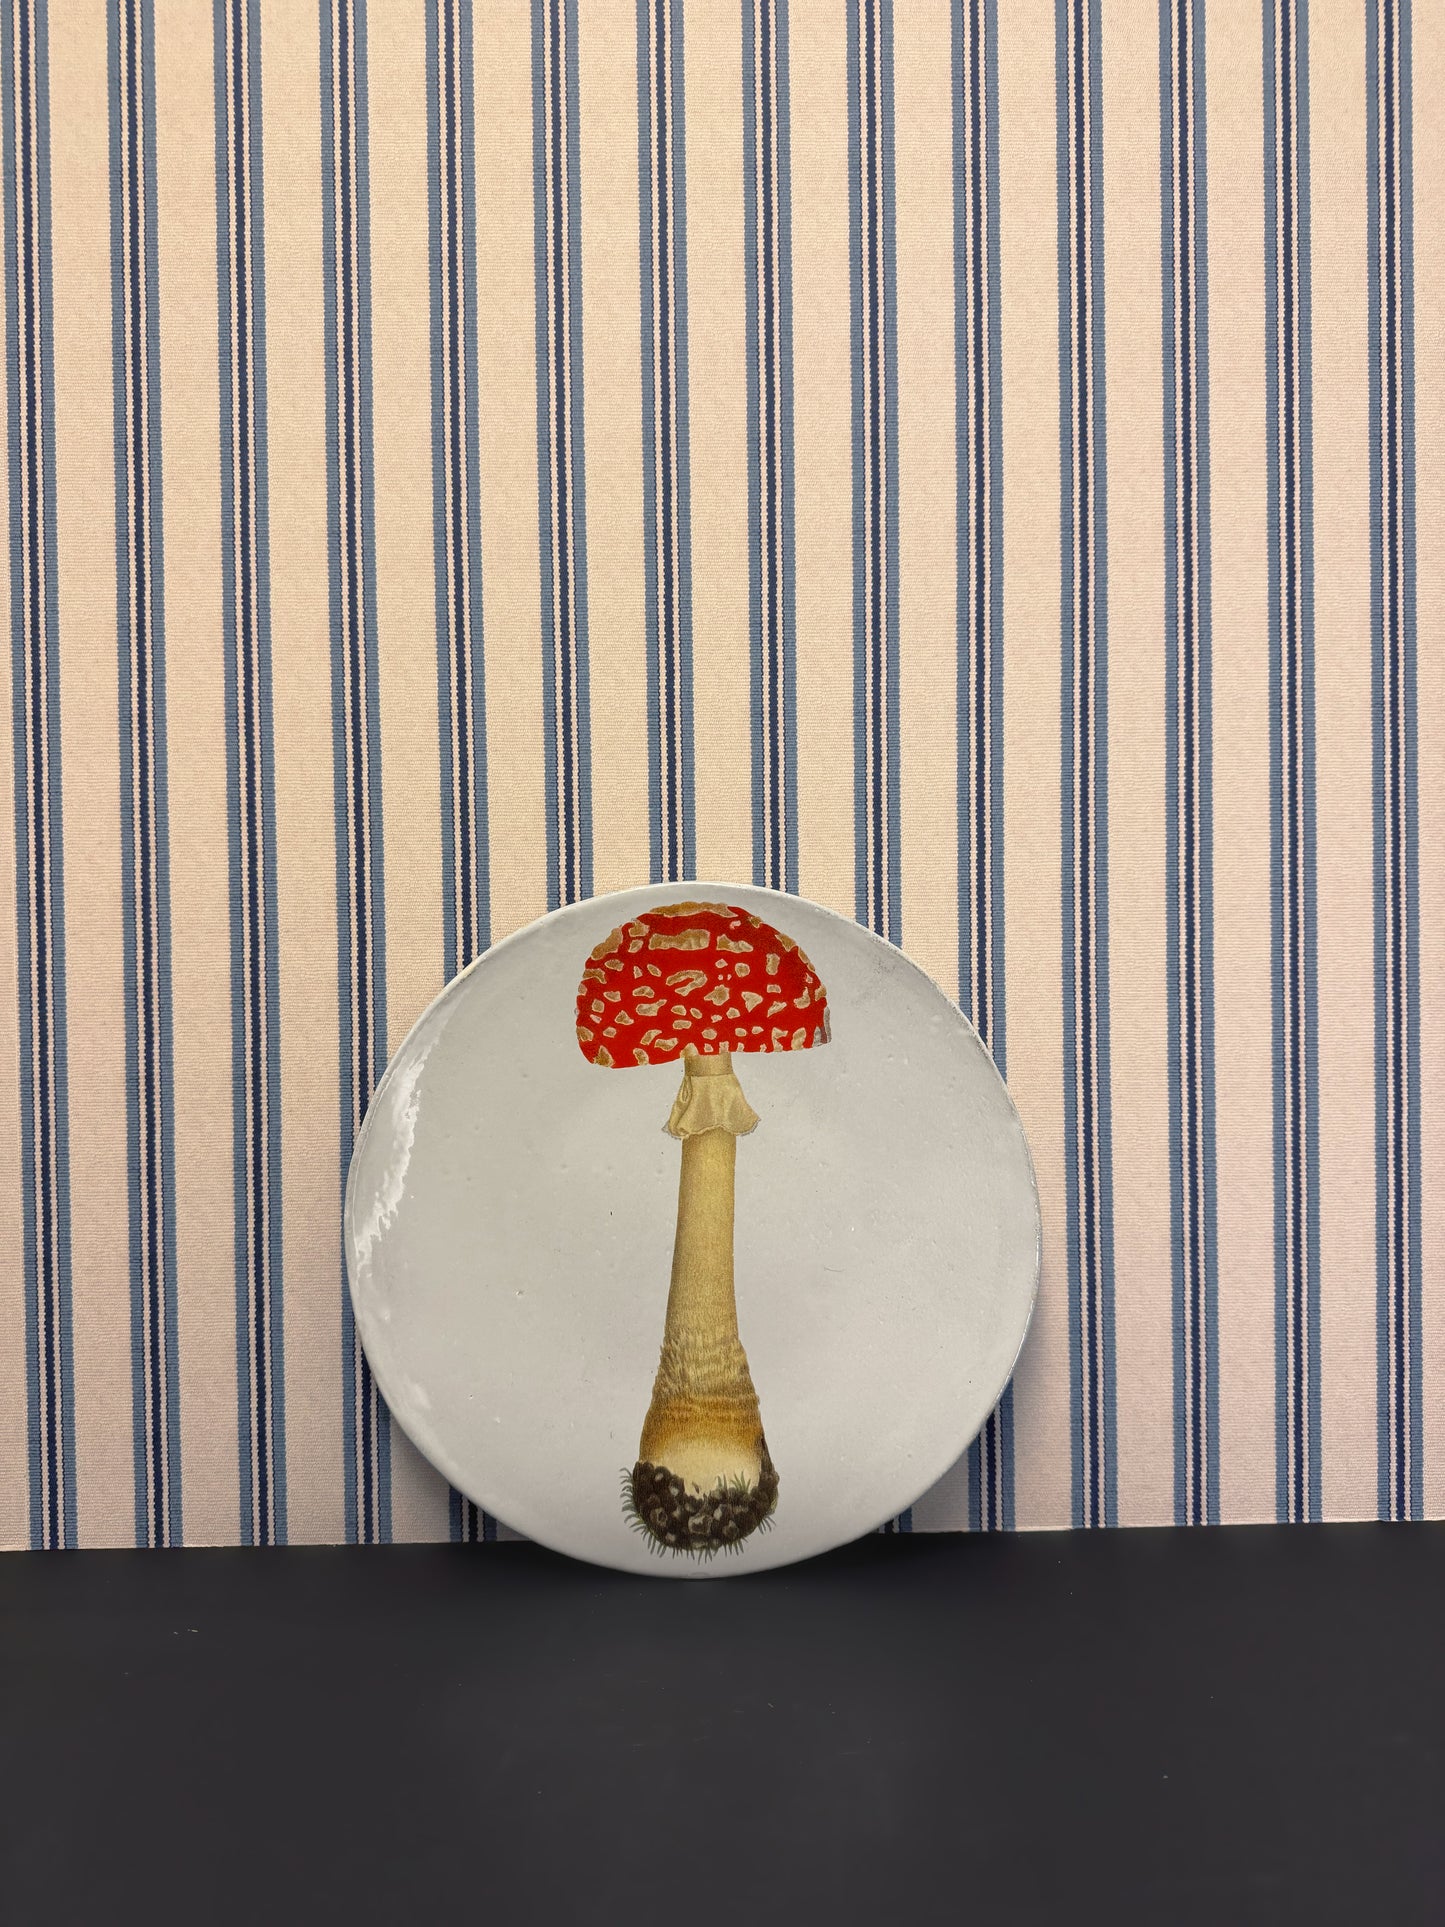 Agaric Fausse Oronge Dinner Plate